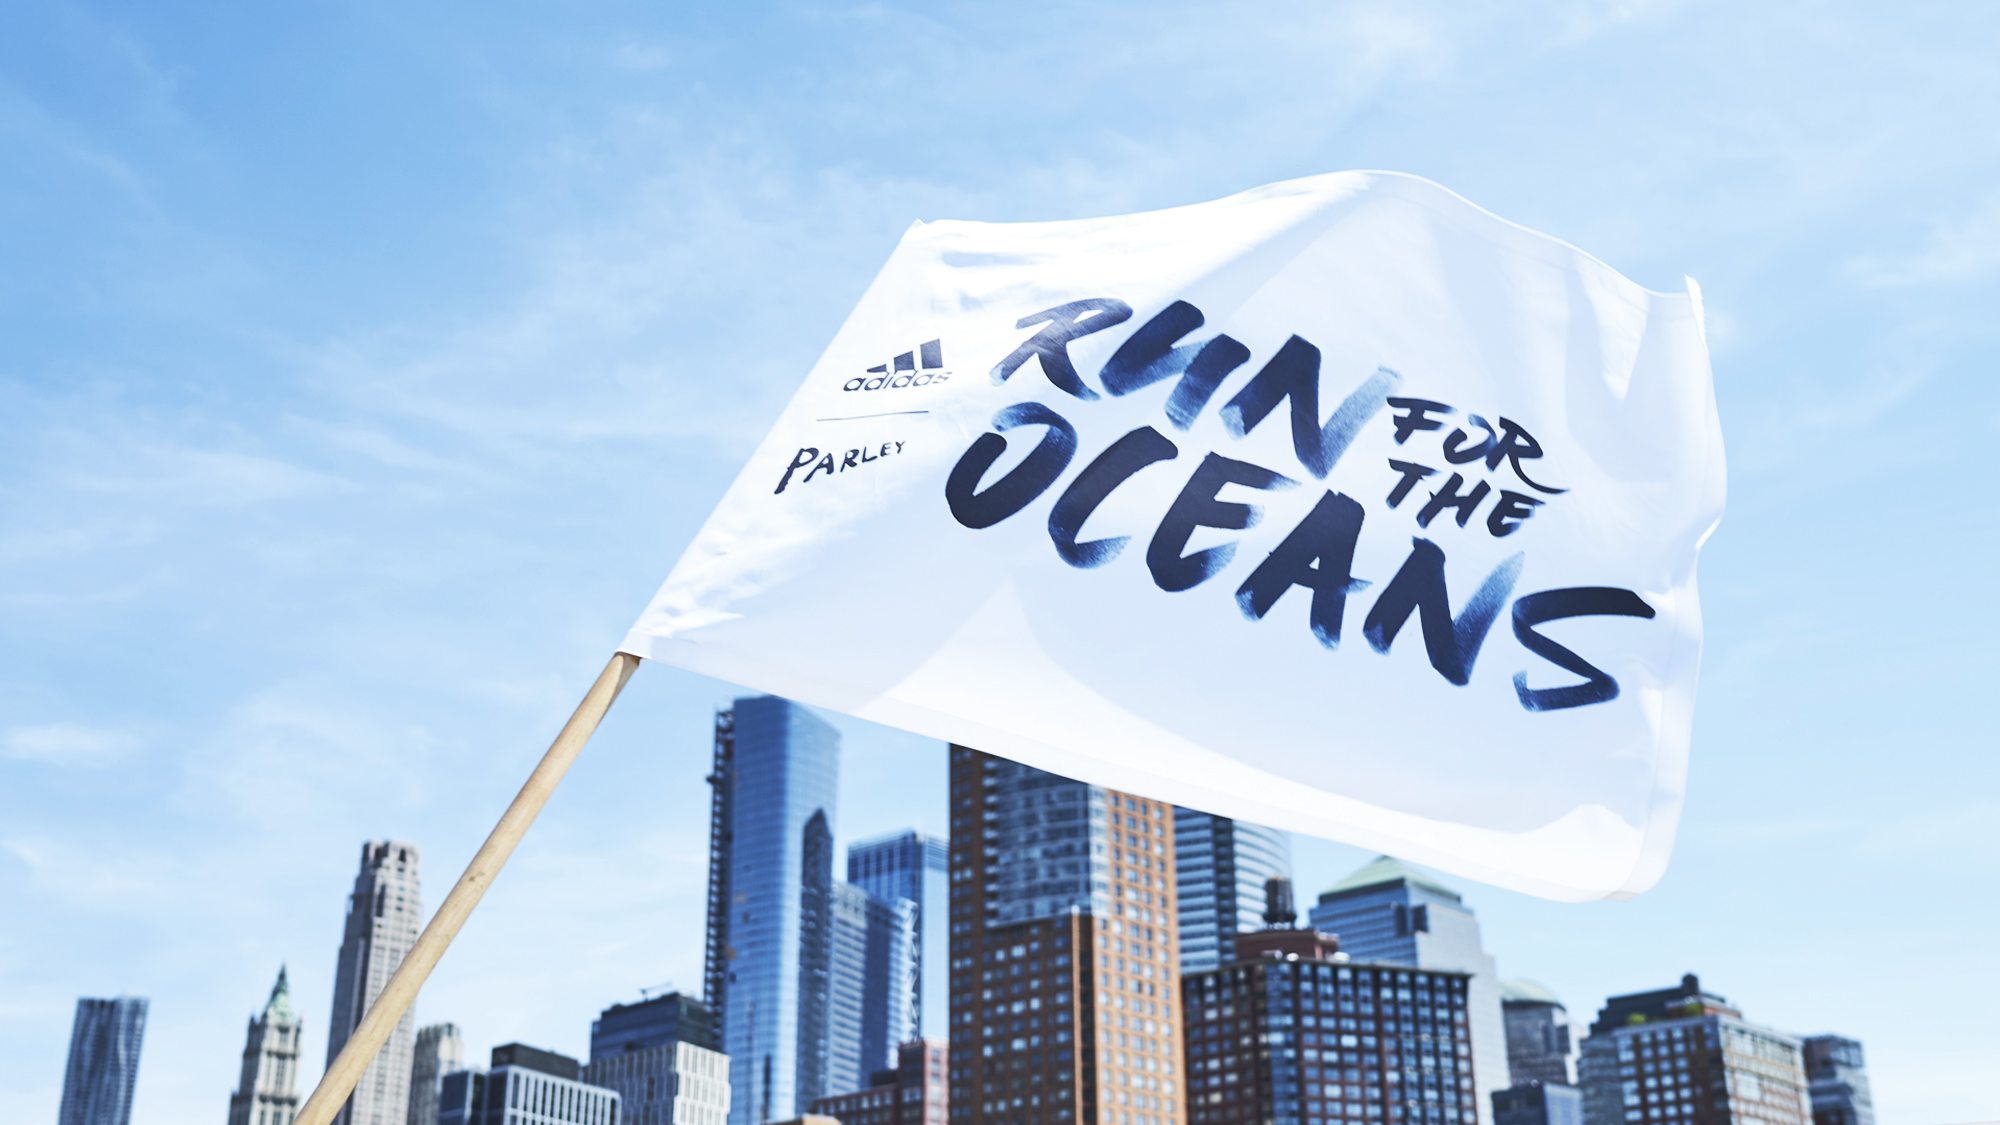 A RECORD-BREAKING RUN FOR THE OCEANS 